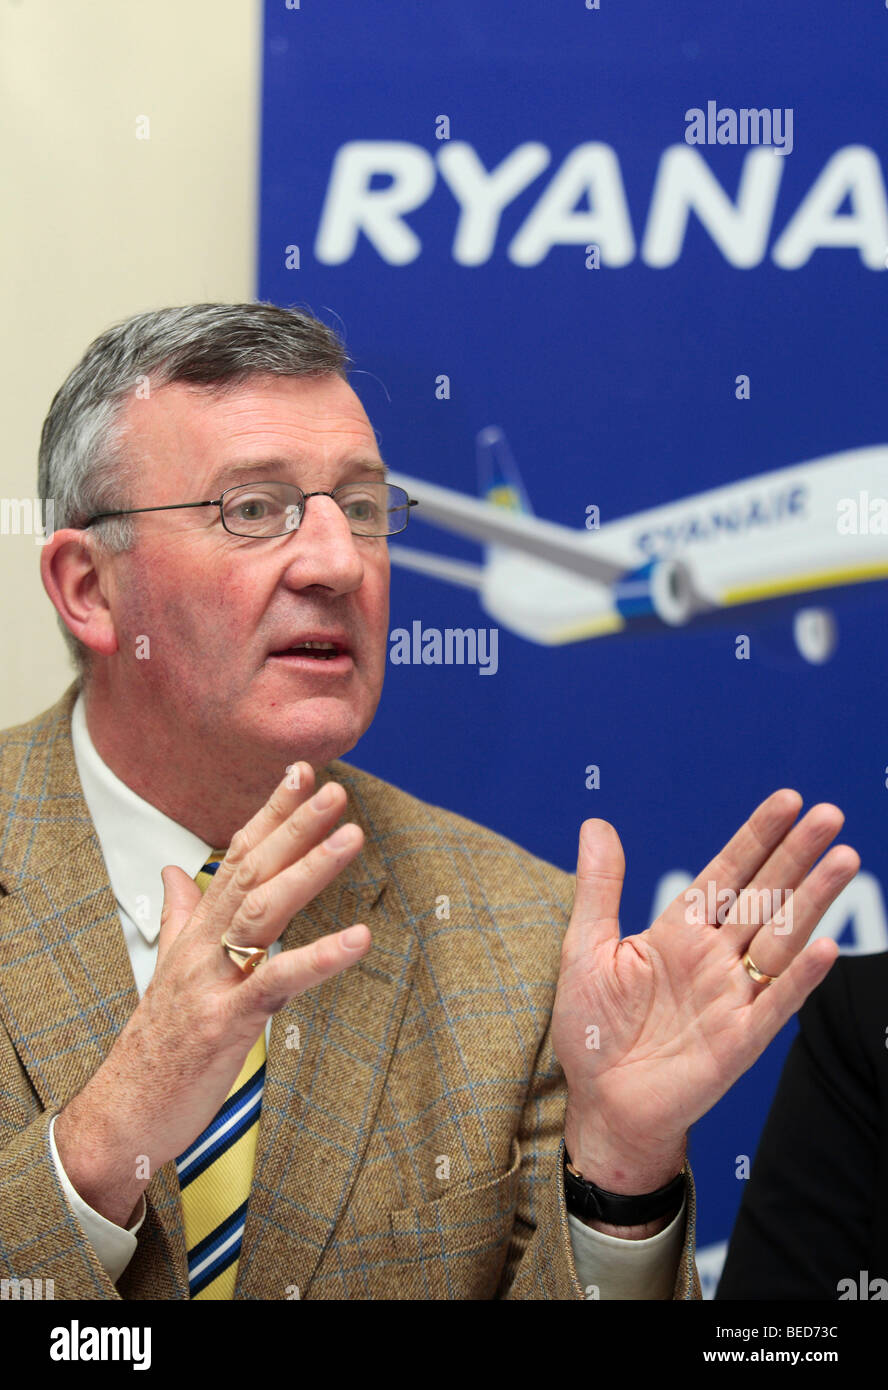 Michael Cawley, Chief Operating Officer of Ryanair during a press conference of the Irish low-cost airline Ryanair in Frankfurt Stock Photo